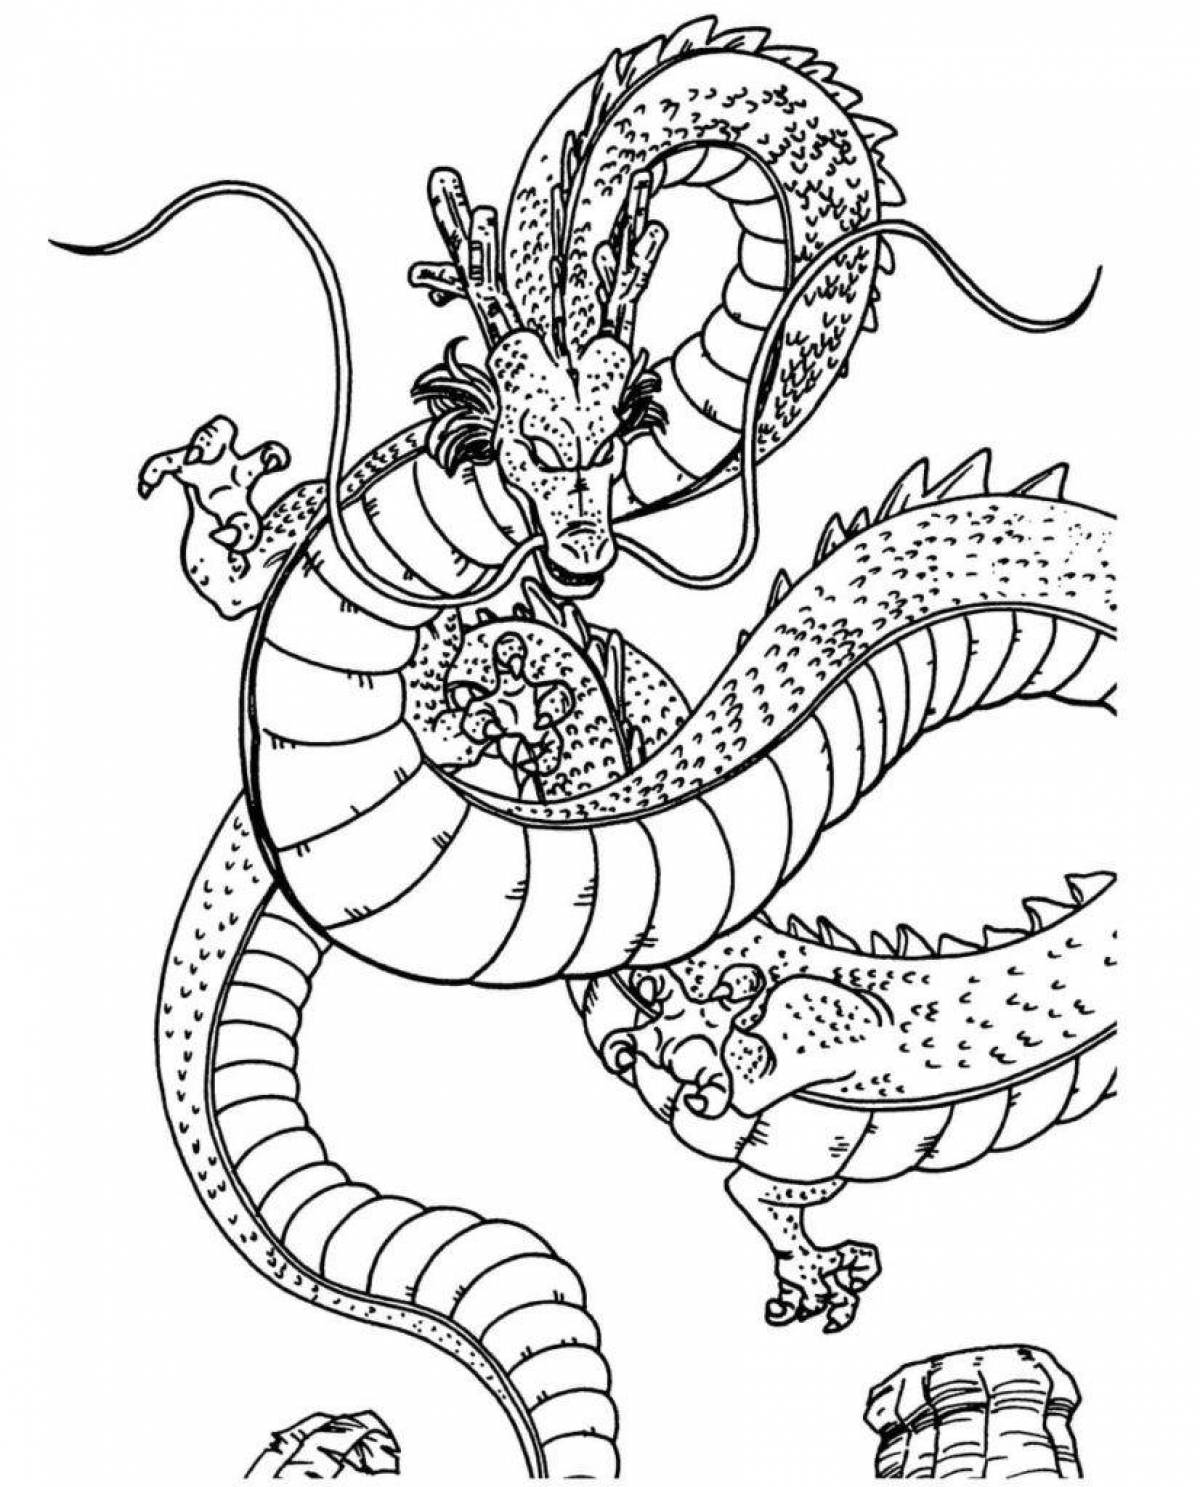 Fine dragon coloring pages